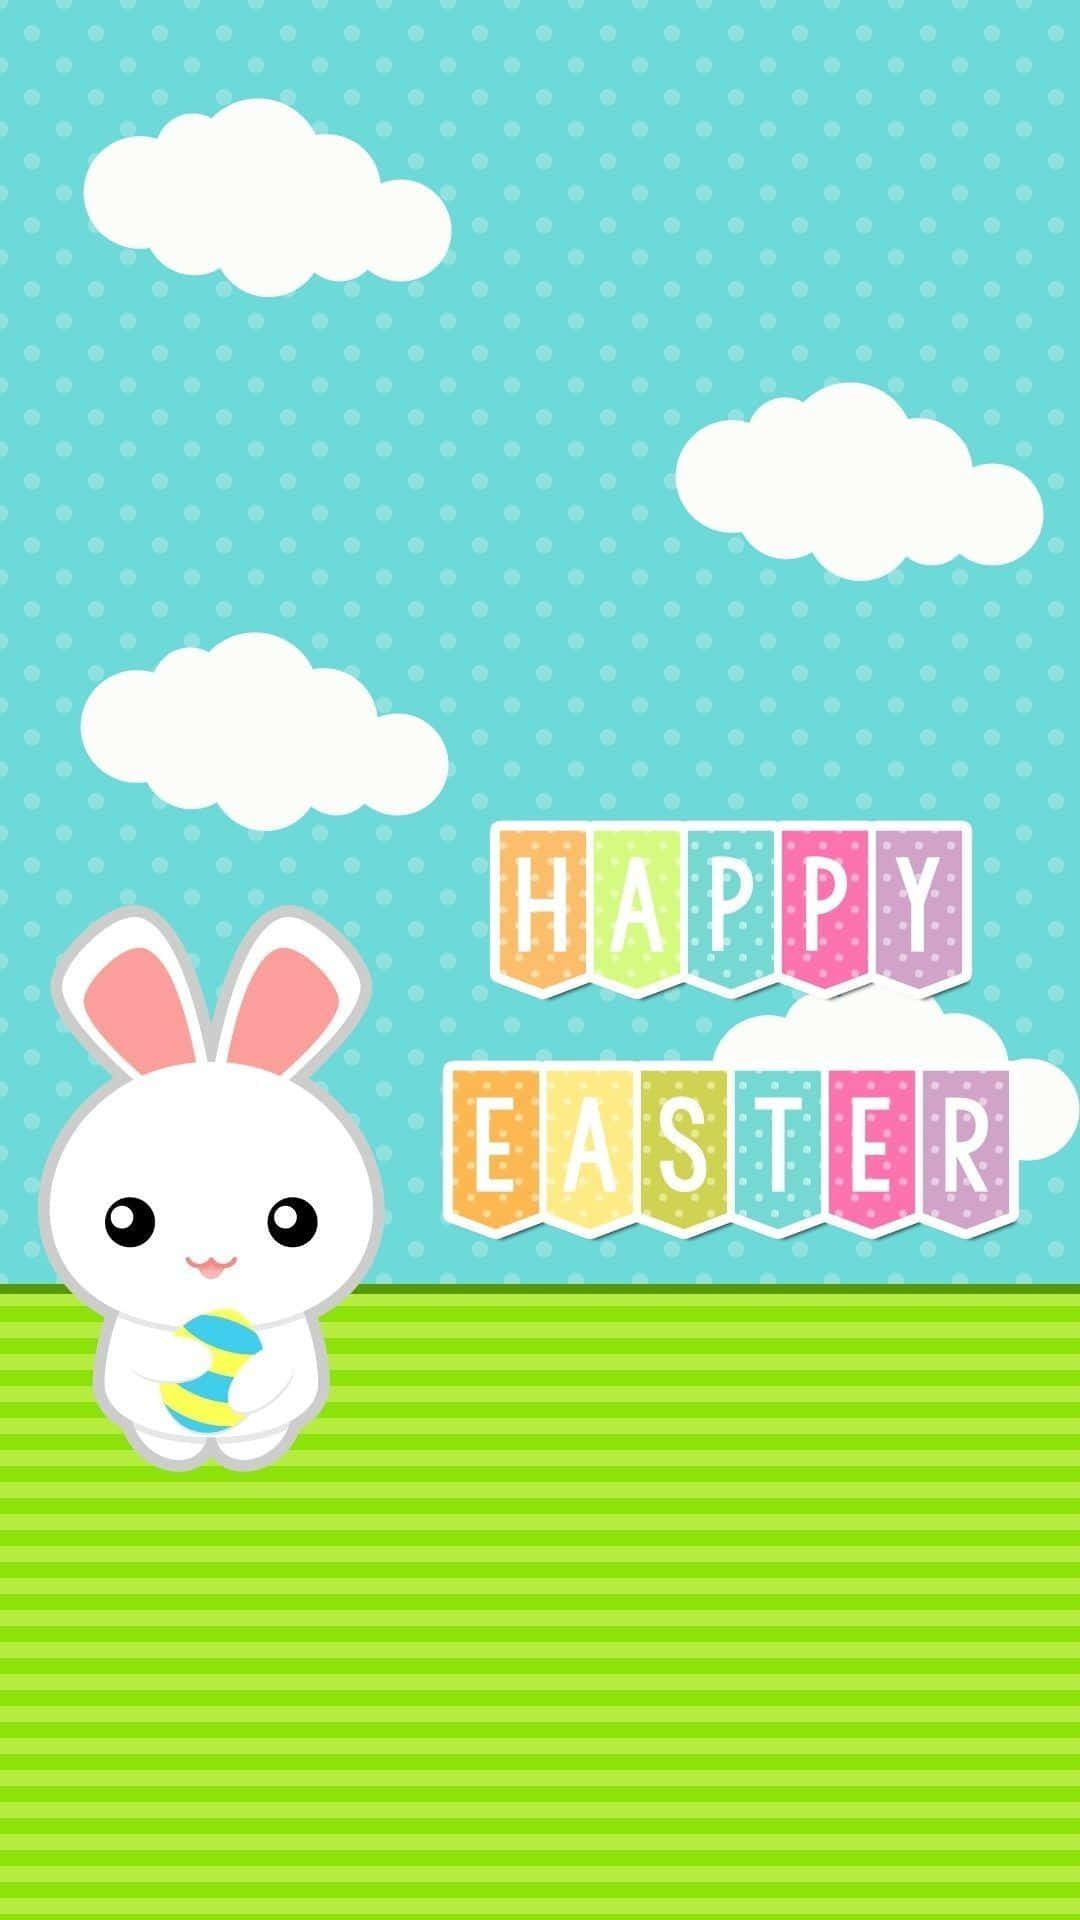 Happy Easter Card With Bunny And Clouds Wallpaper